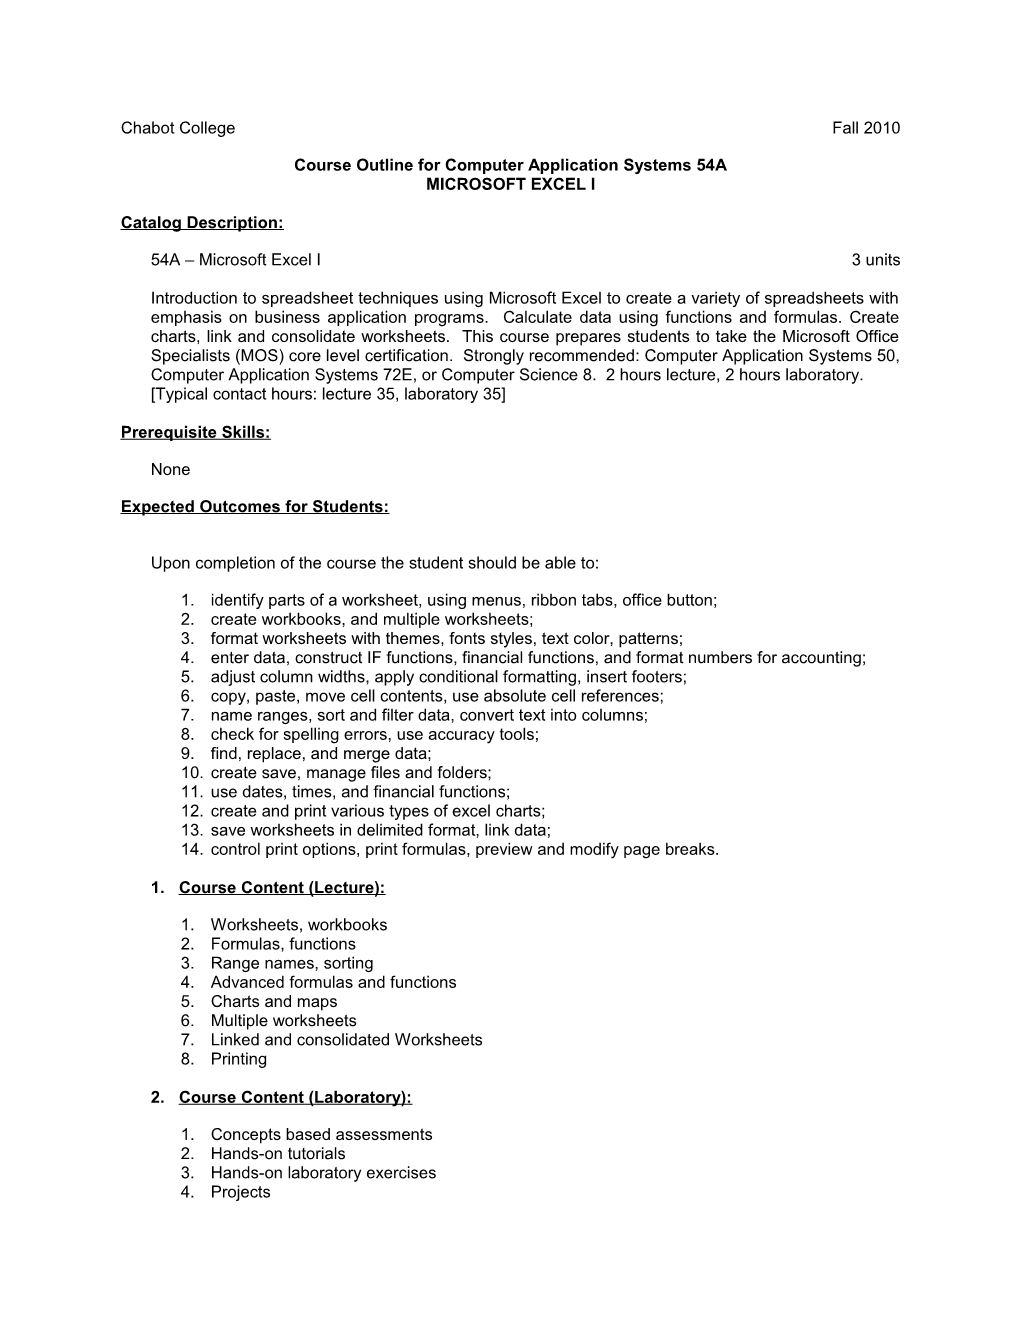 Course Outline for Computer Application Systems 54A, Page 2